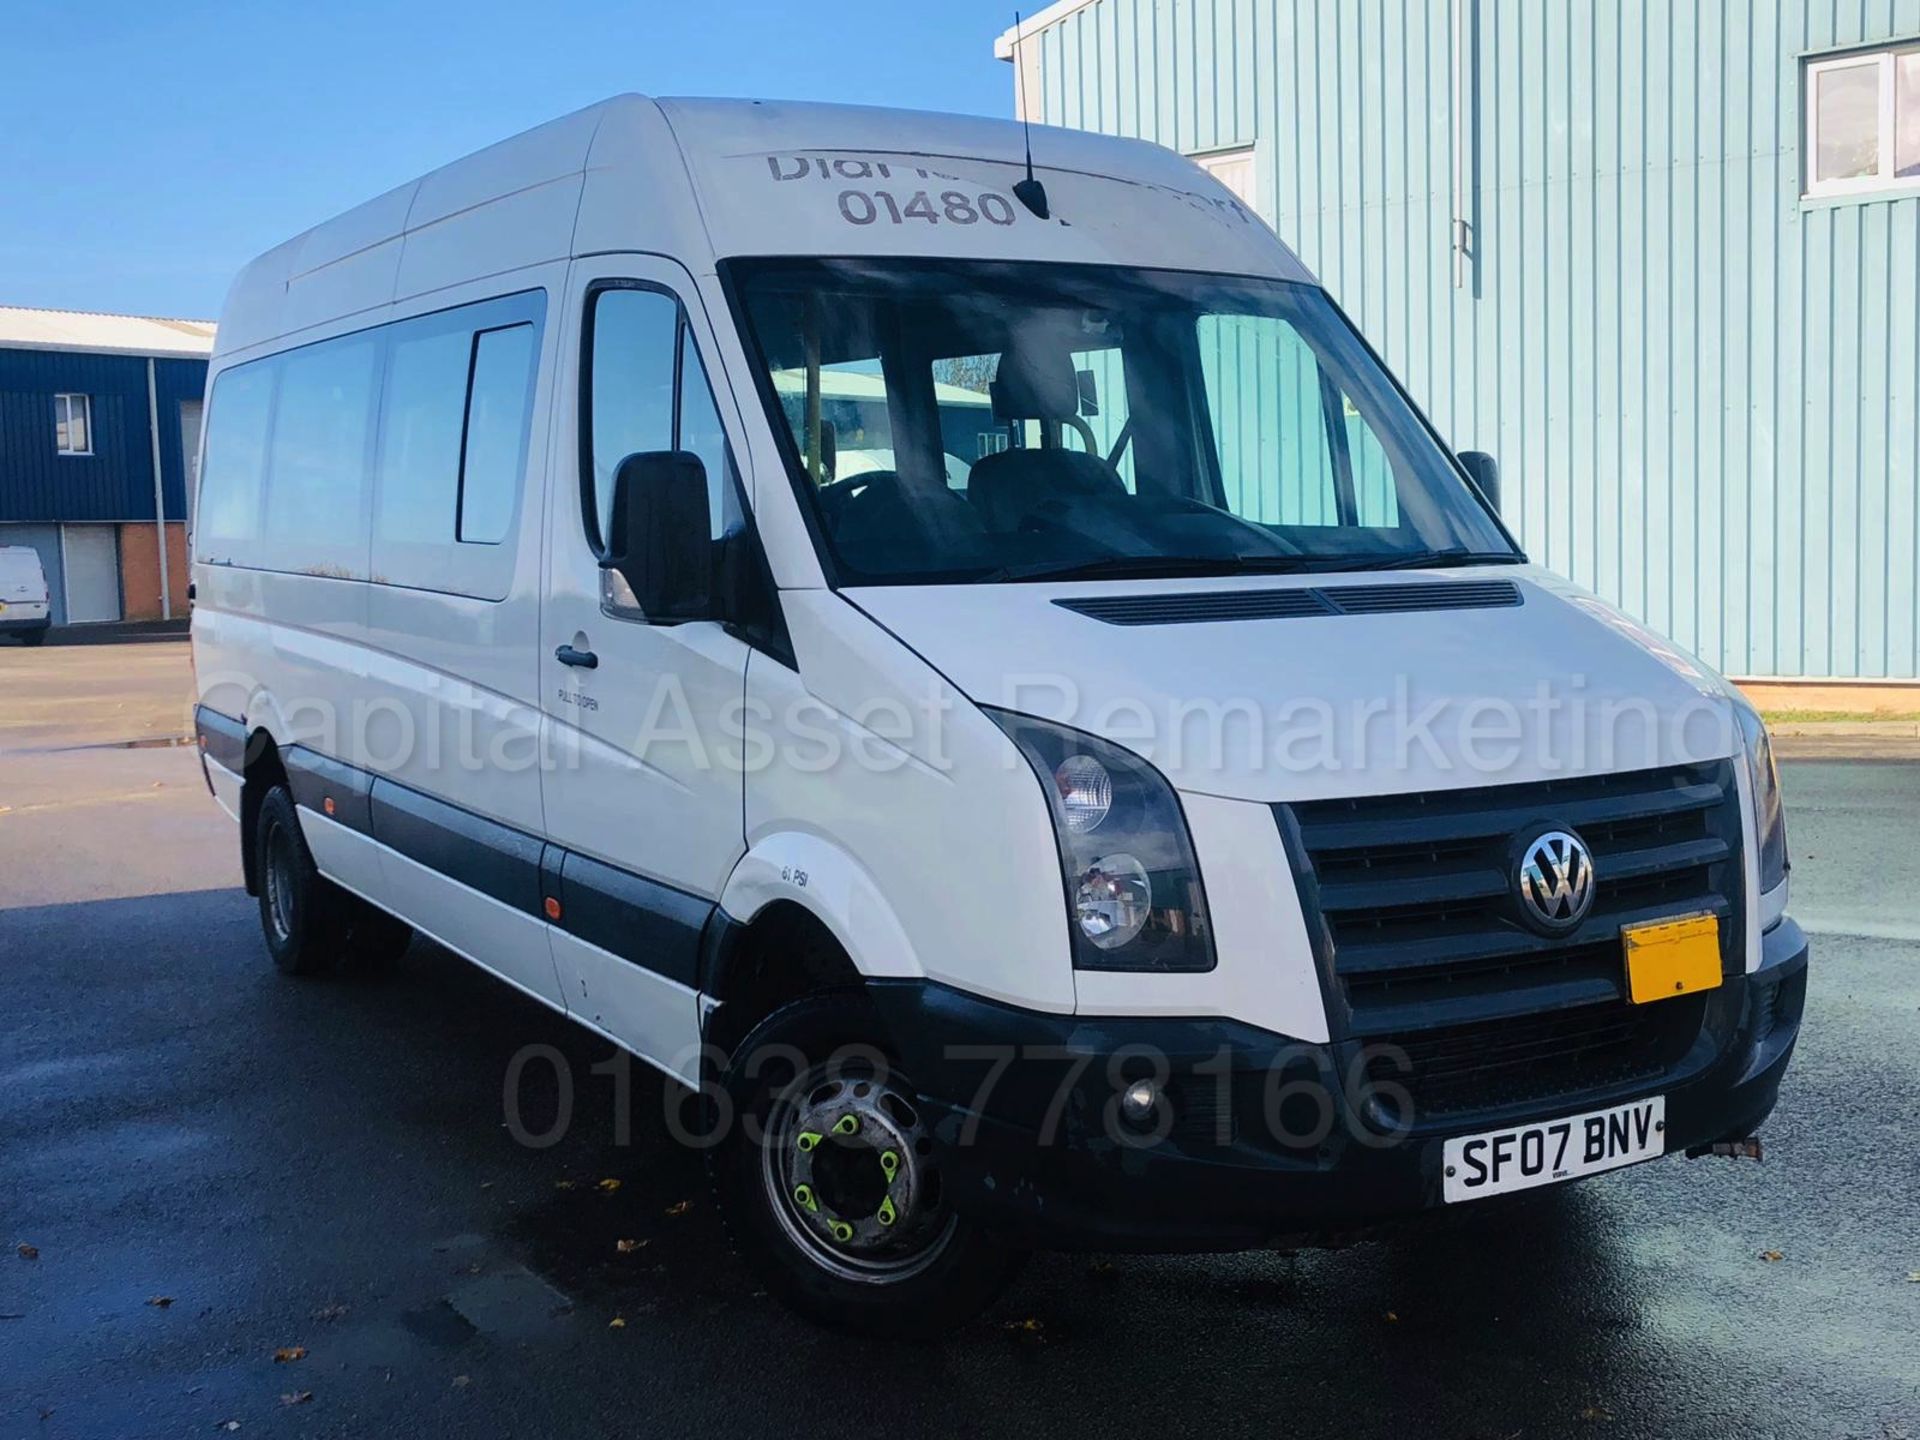 VOLKSWAGEN CRAFTER 2.5 TDI *LWB - 16 SEATER MINI-BUS / COACH* (2007) *ELECTRIC WHEEL CHAIR LIFT* - Image 5 of 38